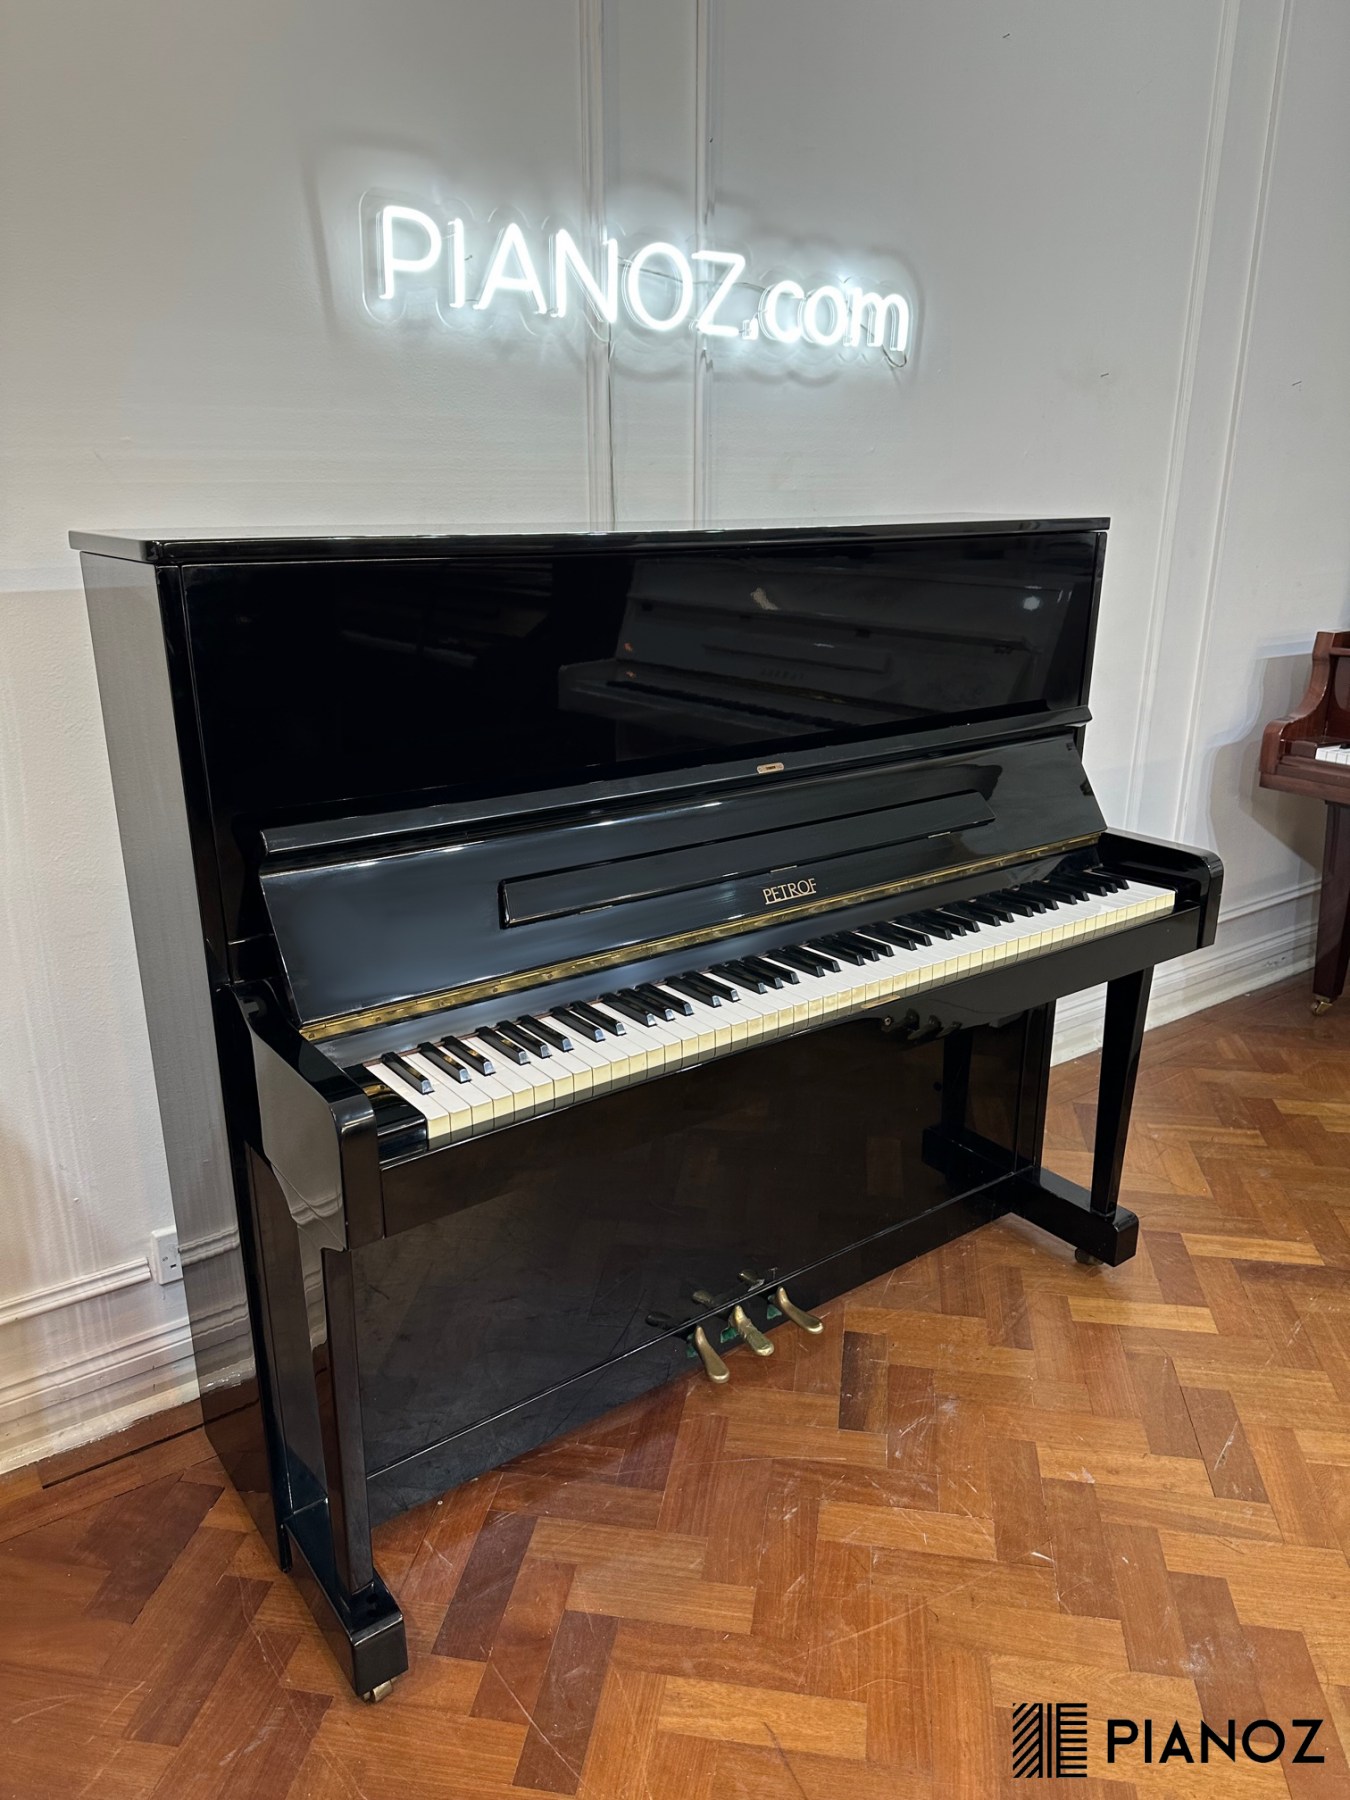 Petrof 125 Upright Piano piano for sale in UK